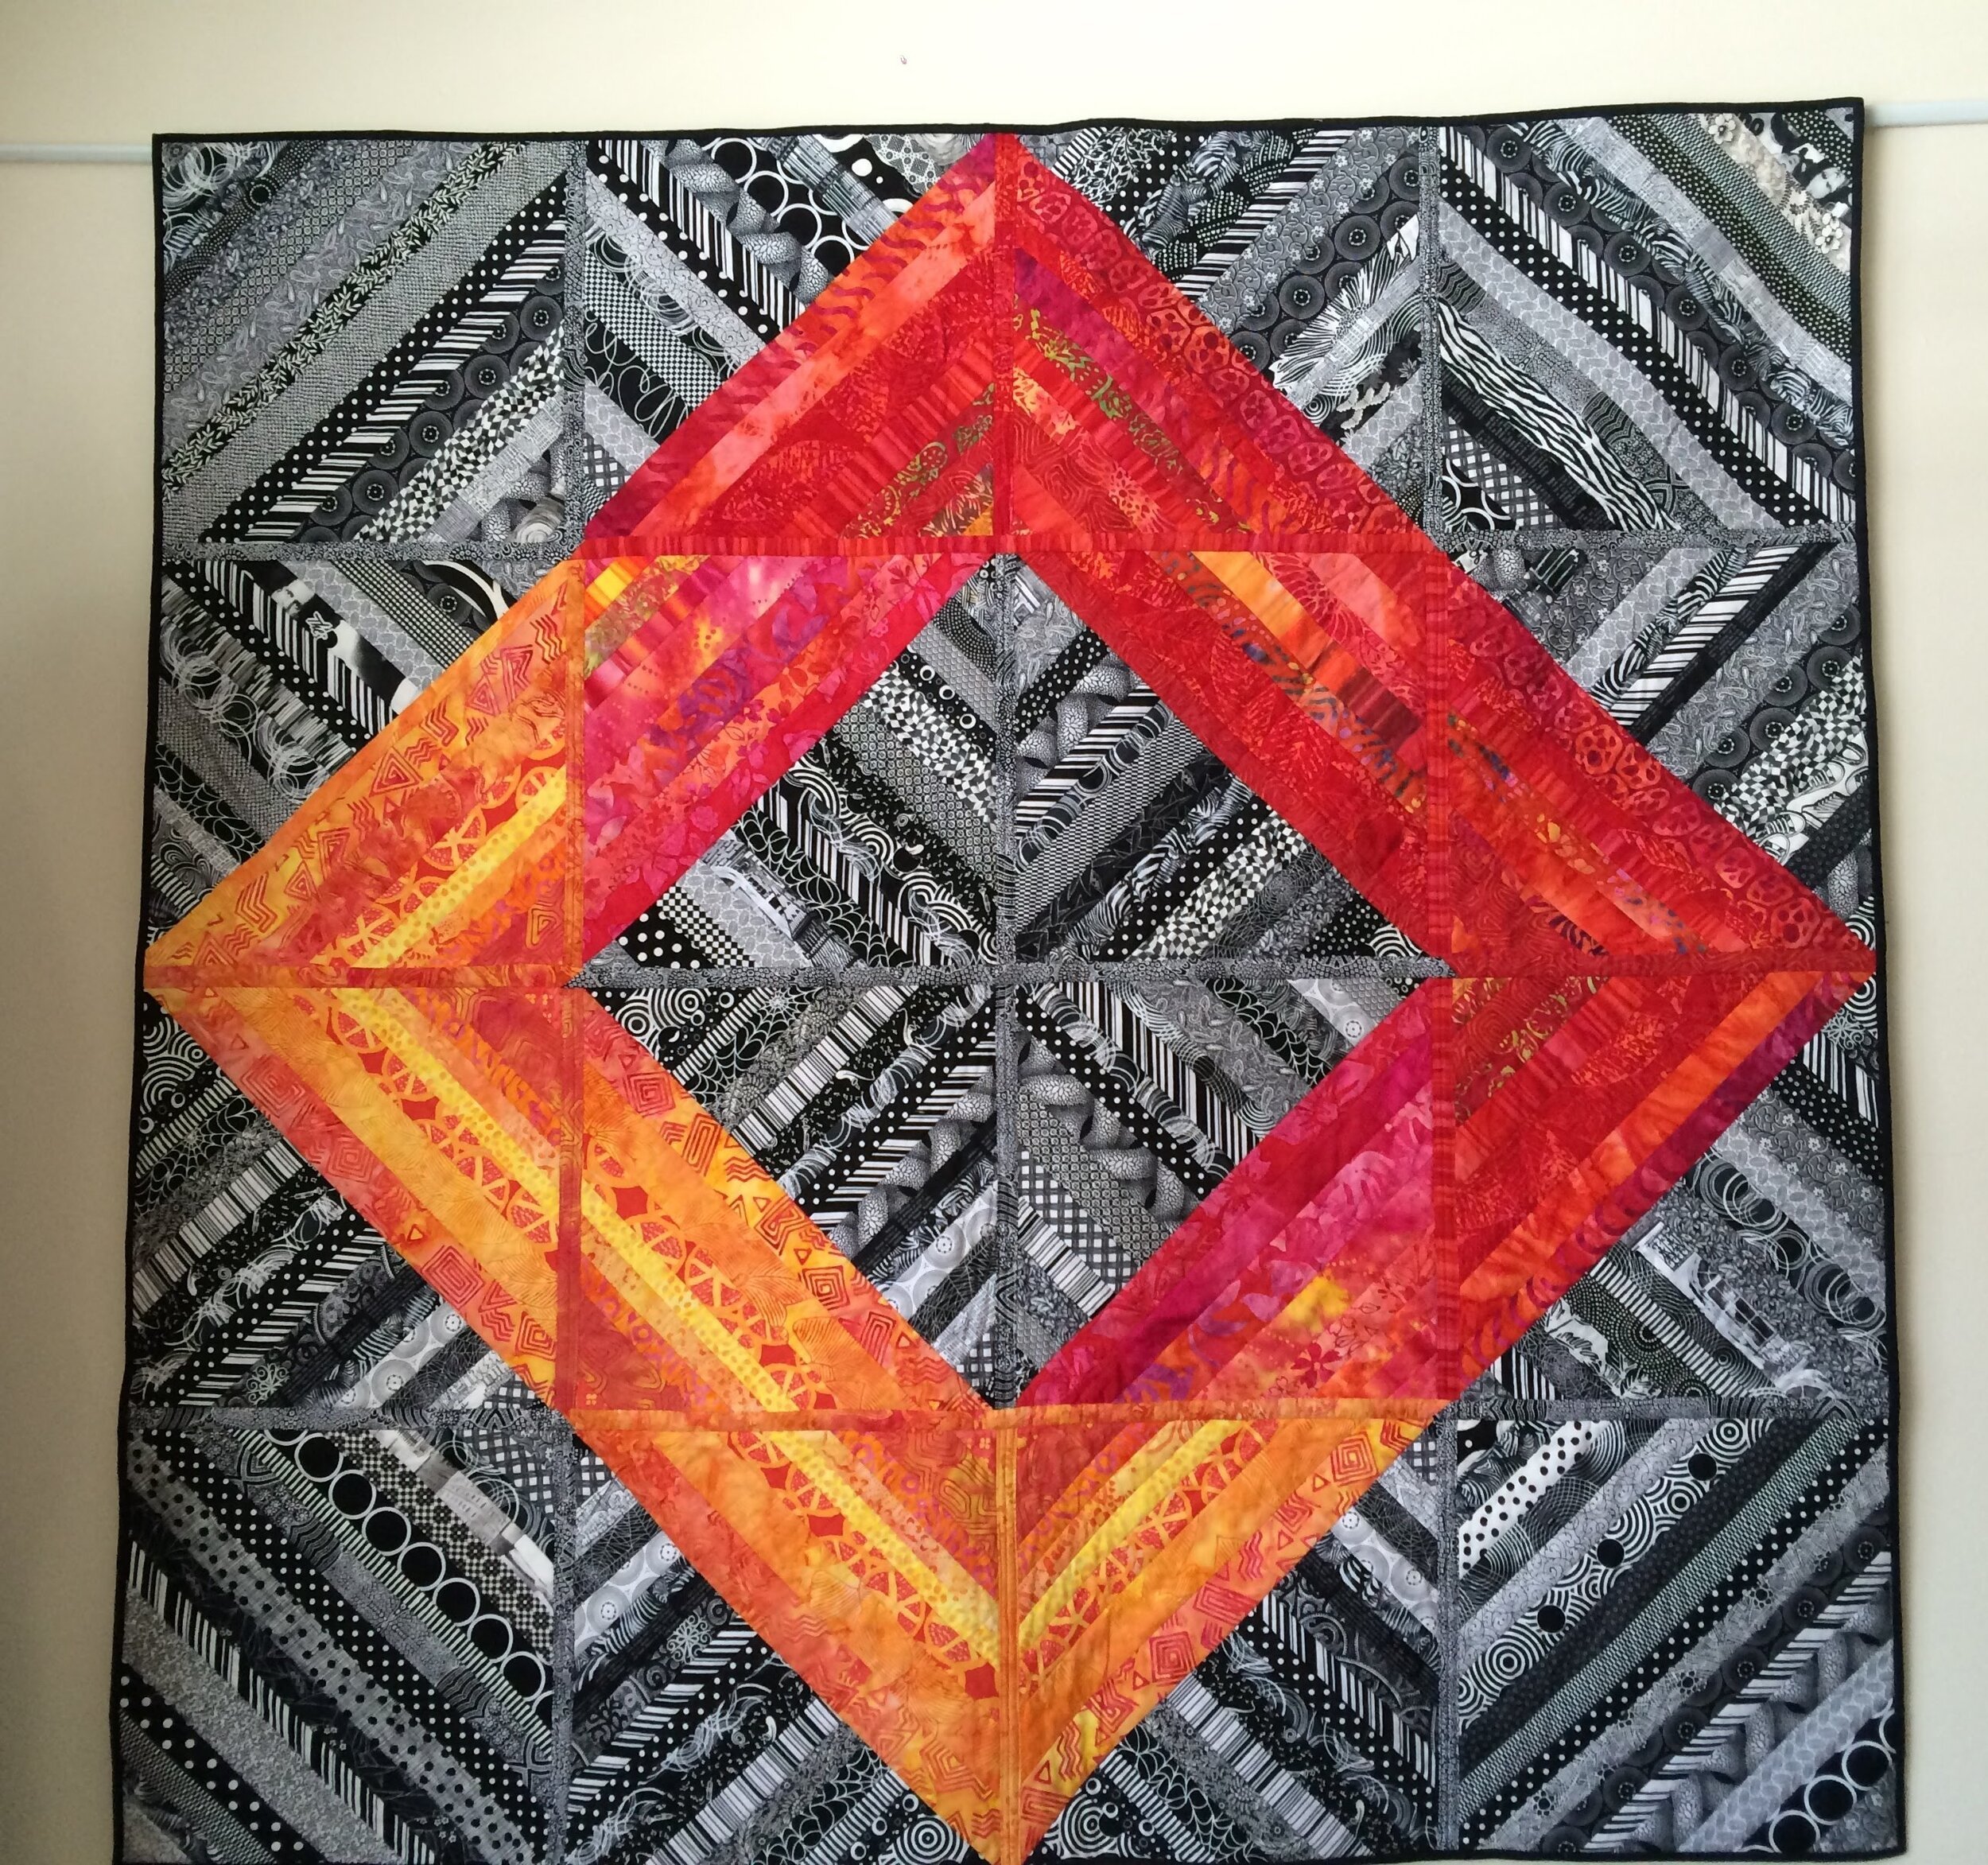 Volcano Lava Wall Quilt (one-of-a-kind) by Josie's Colourful Journey